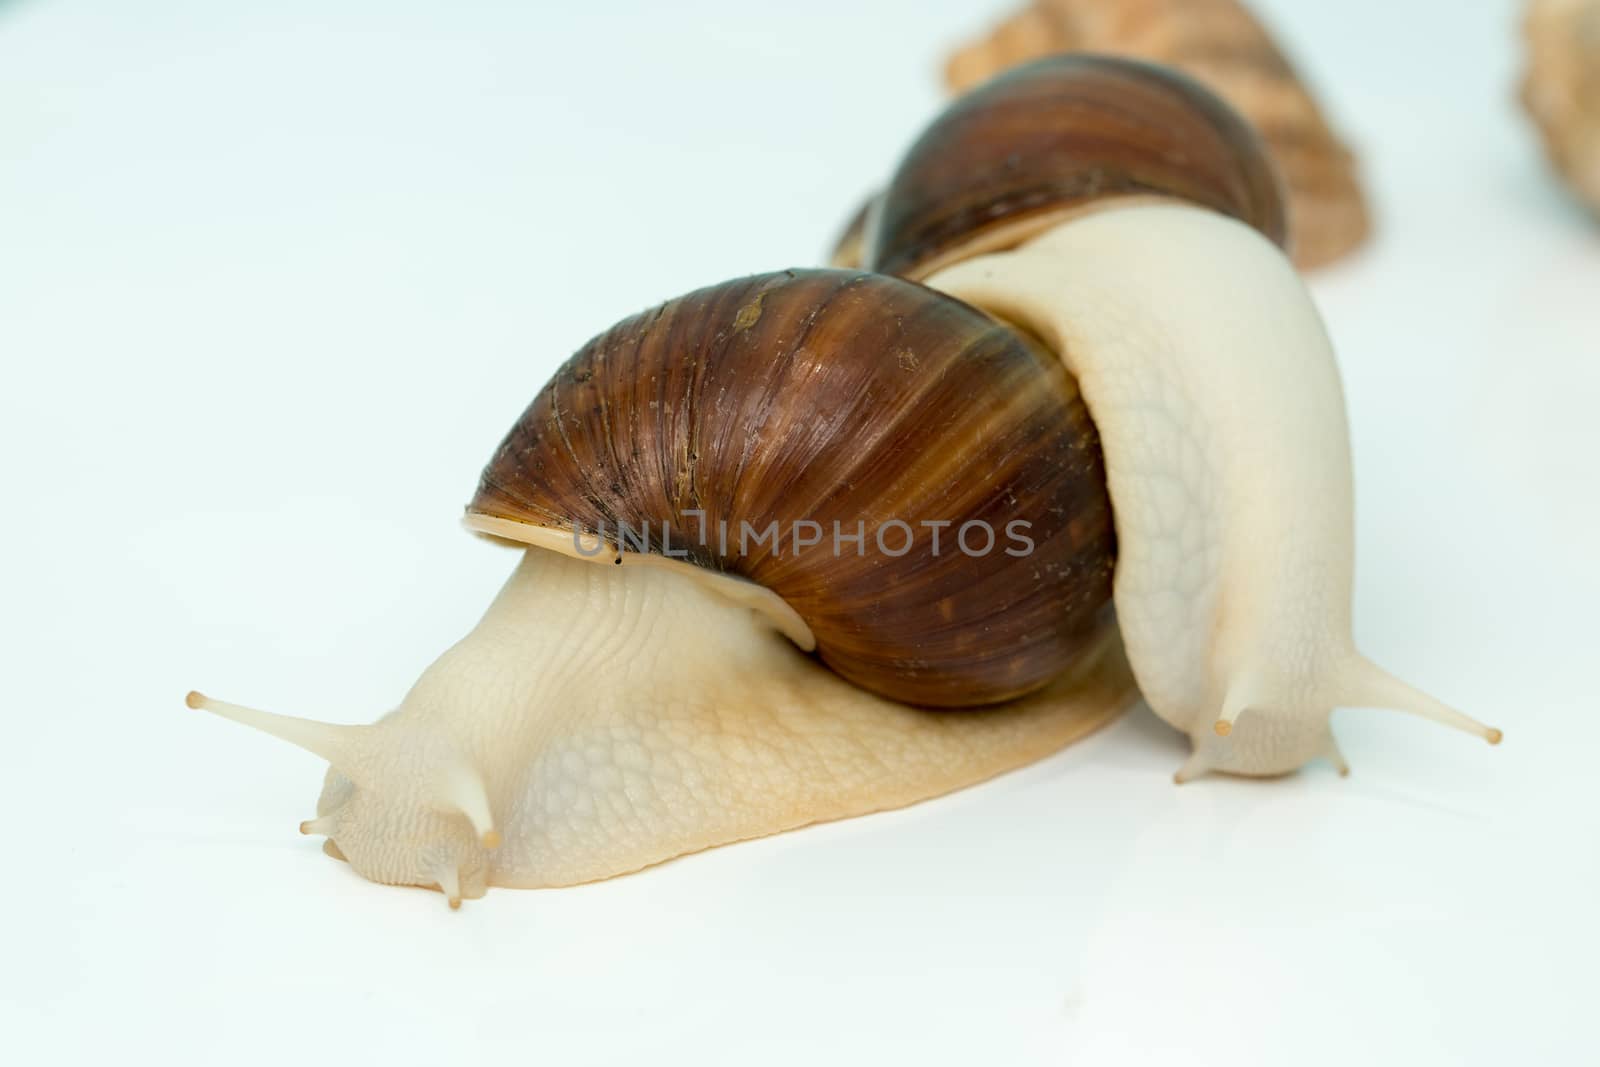 Giant snail Achatina is the largest land mollusk